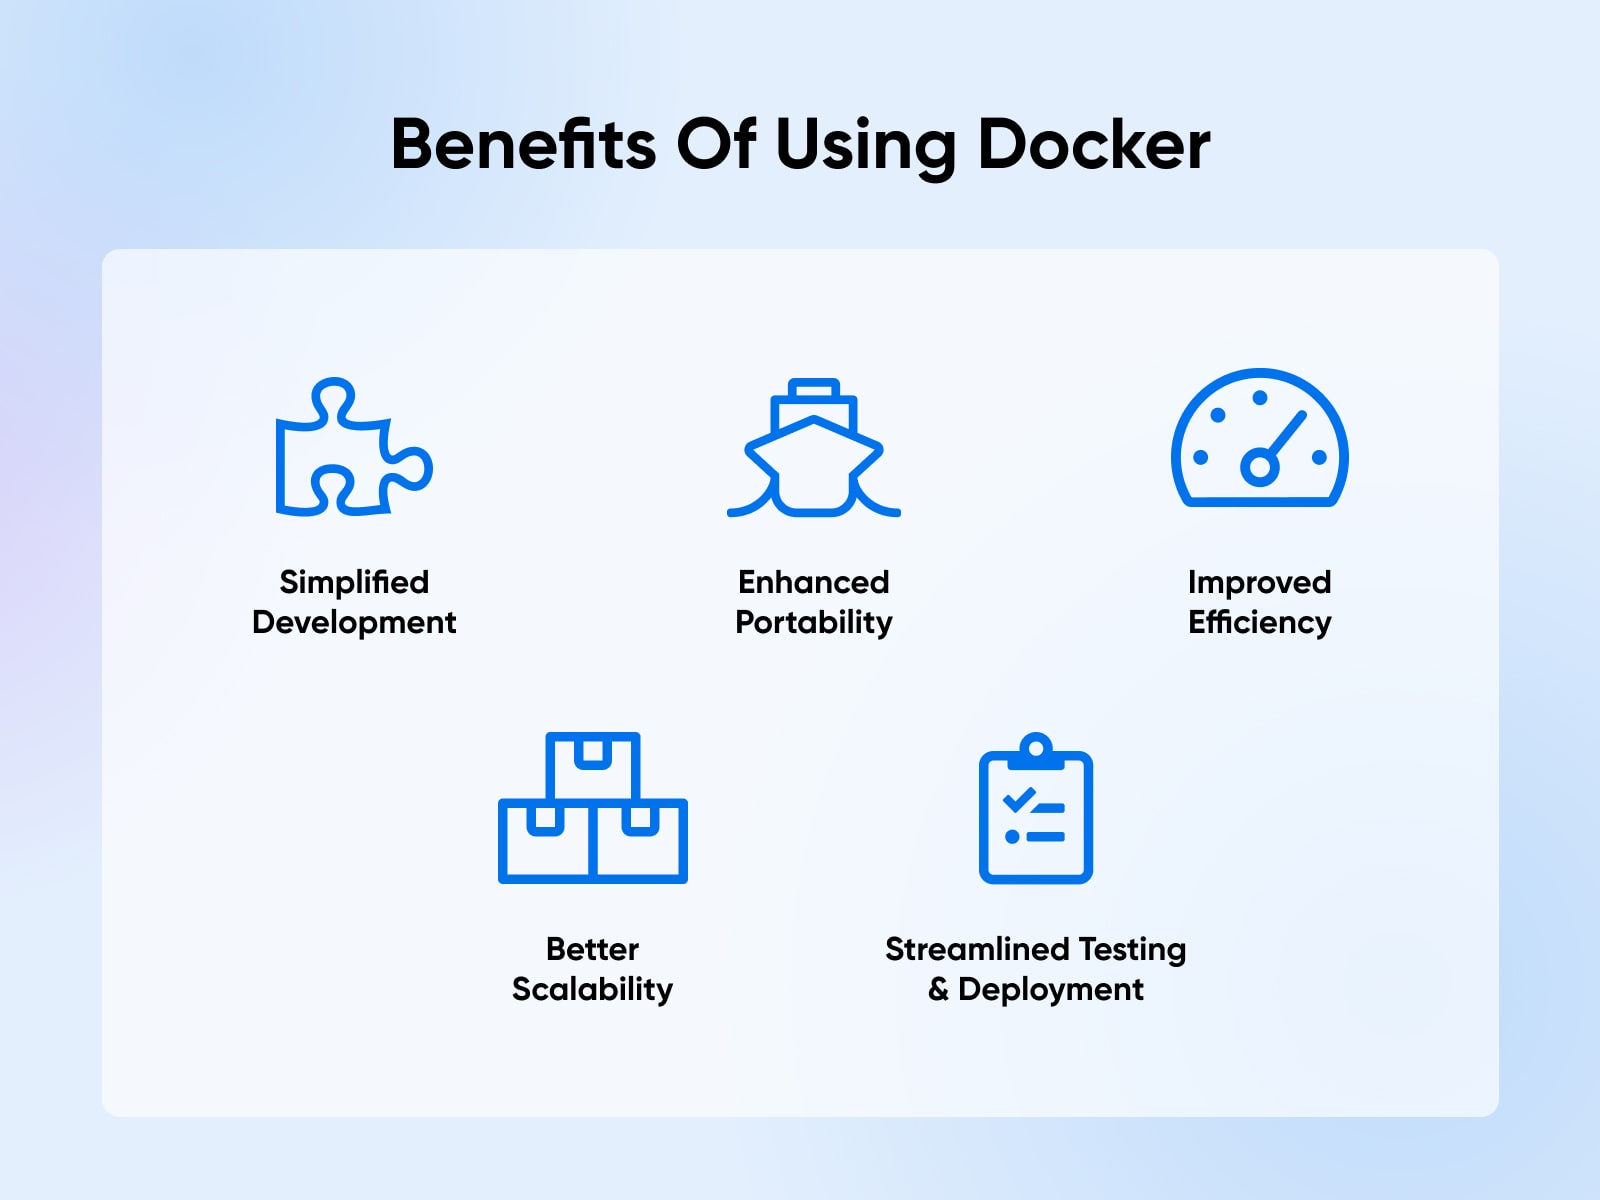 5 "Benefits Of Using Docker" diagram with icons and text for "Simplified Development," "Improved Efficiency," and so on.